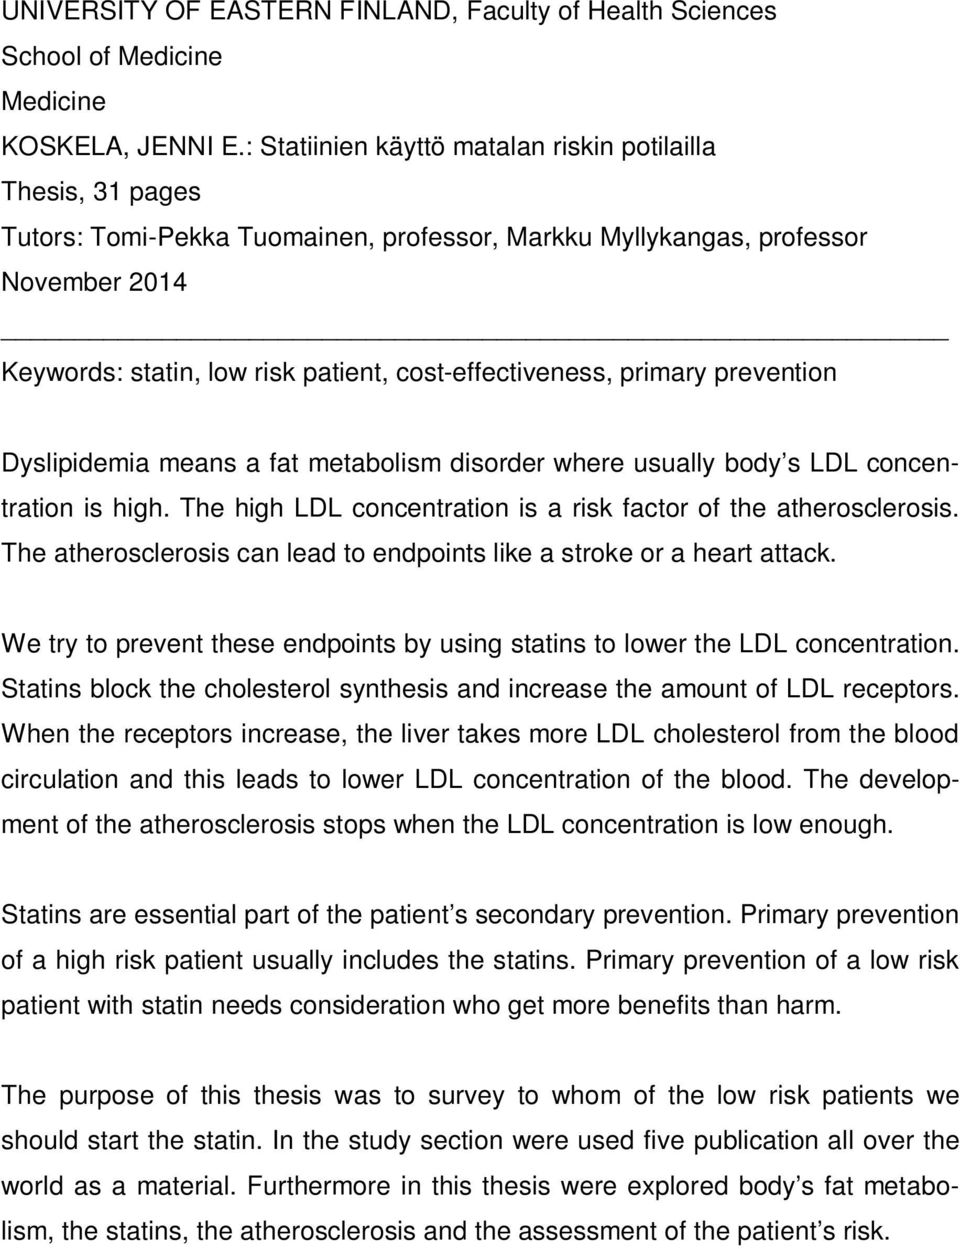 cost-effectiveness, primary prevention Dyslipidemia means a fat metabolism disorder where usually body s LDL concentration is high. The high LDL concentration is a risk factor of the atherosclerosis.